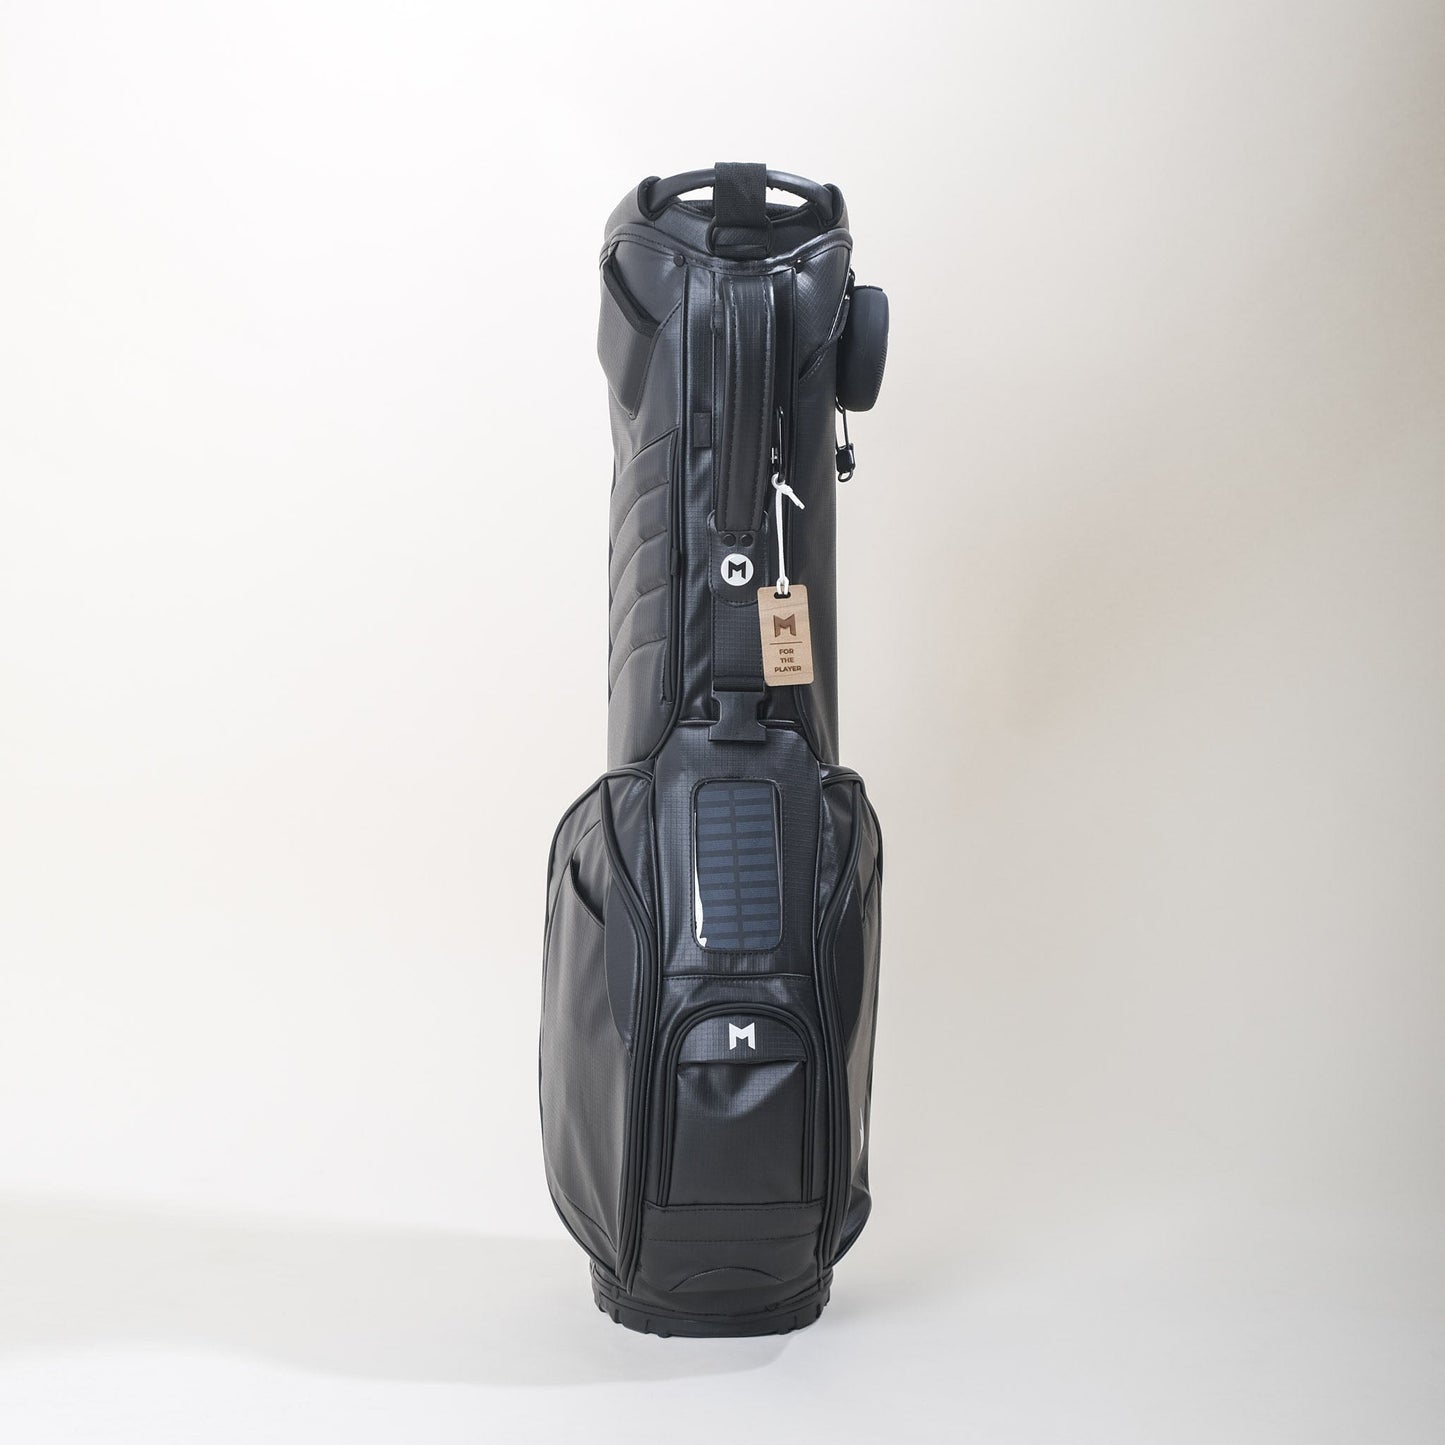 Black golf bag by MNML GOLF with a new top handle, spine handle and made from 100% recycled material.